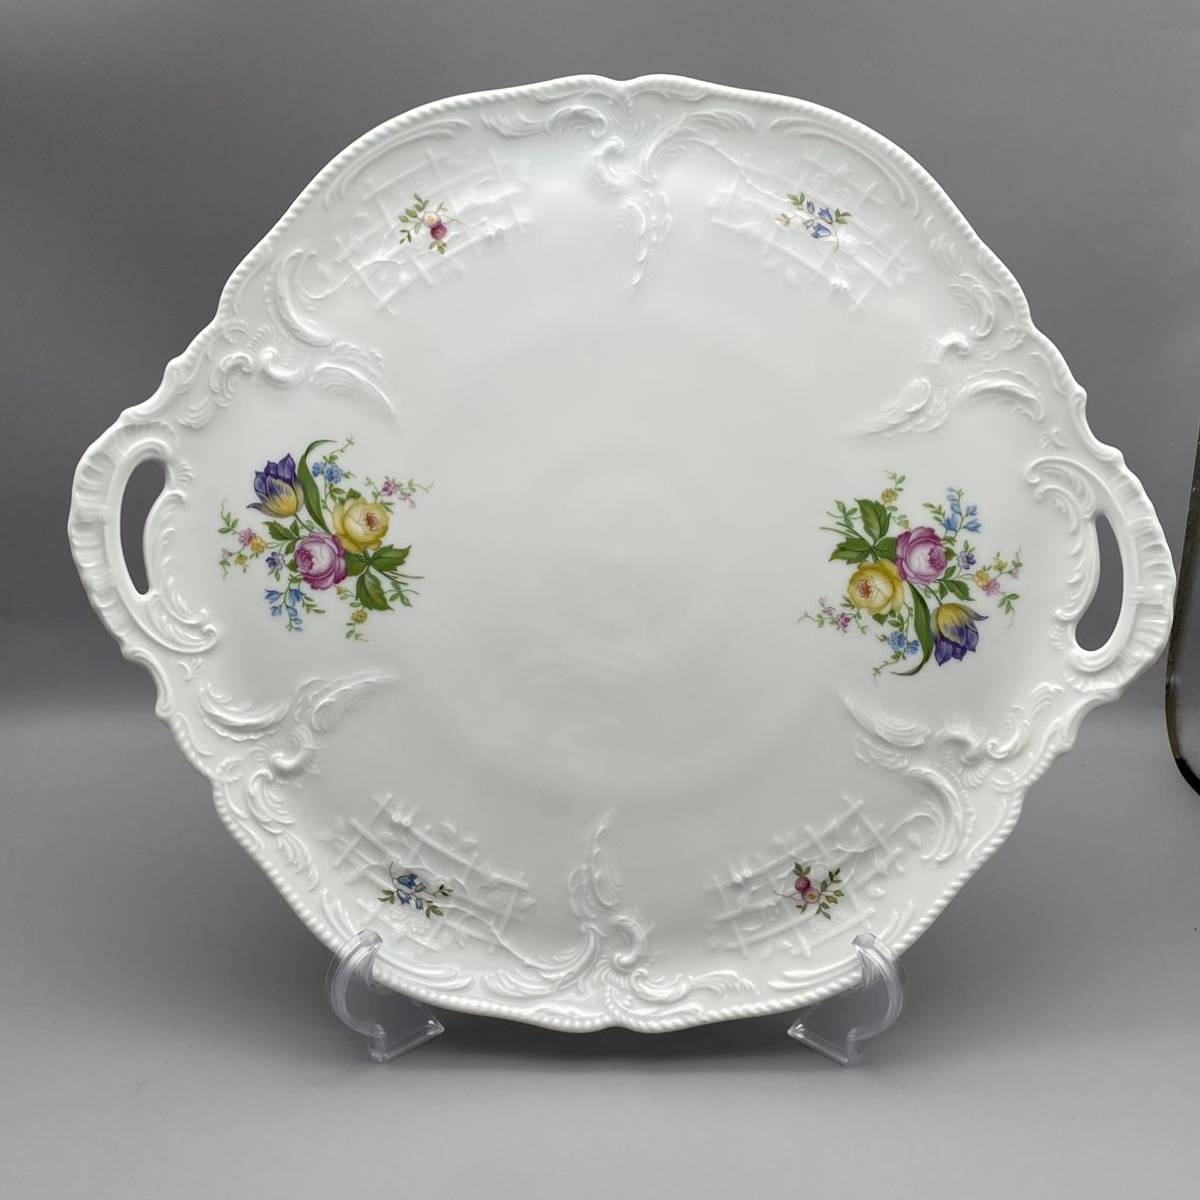  ultra rare [ free shipping ] Rosenthal /Rosenthal/ regular goods / new goods unused / Classic rose / hand attaching plate / large plate /1 sheets /BB plate (690)